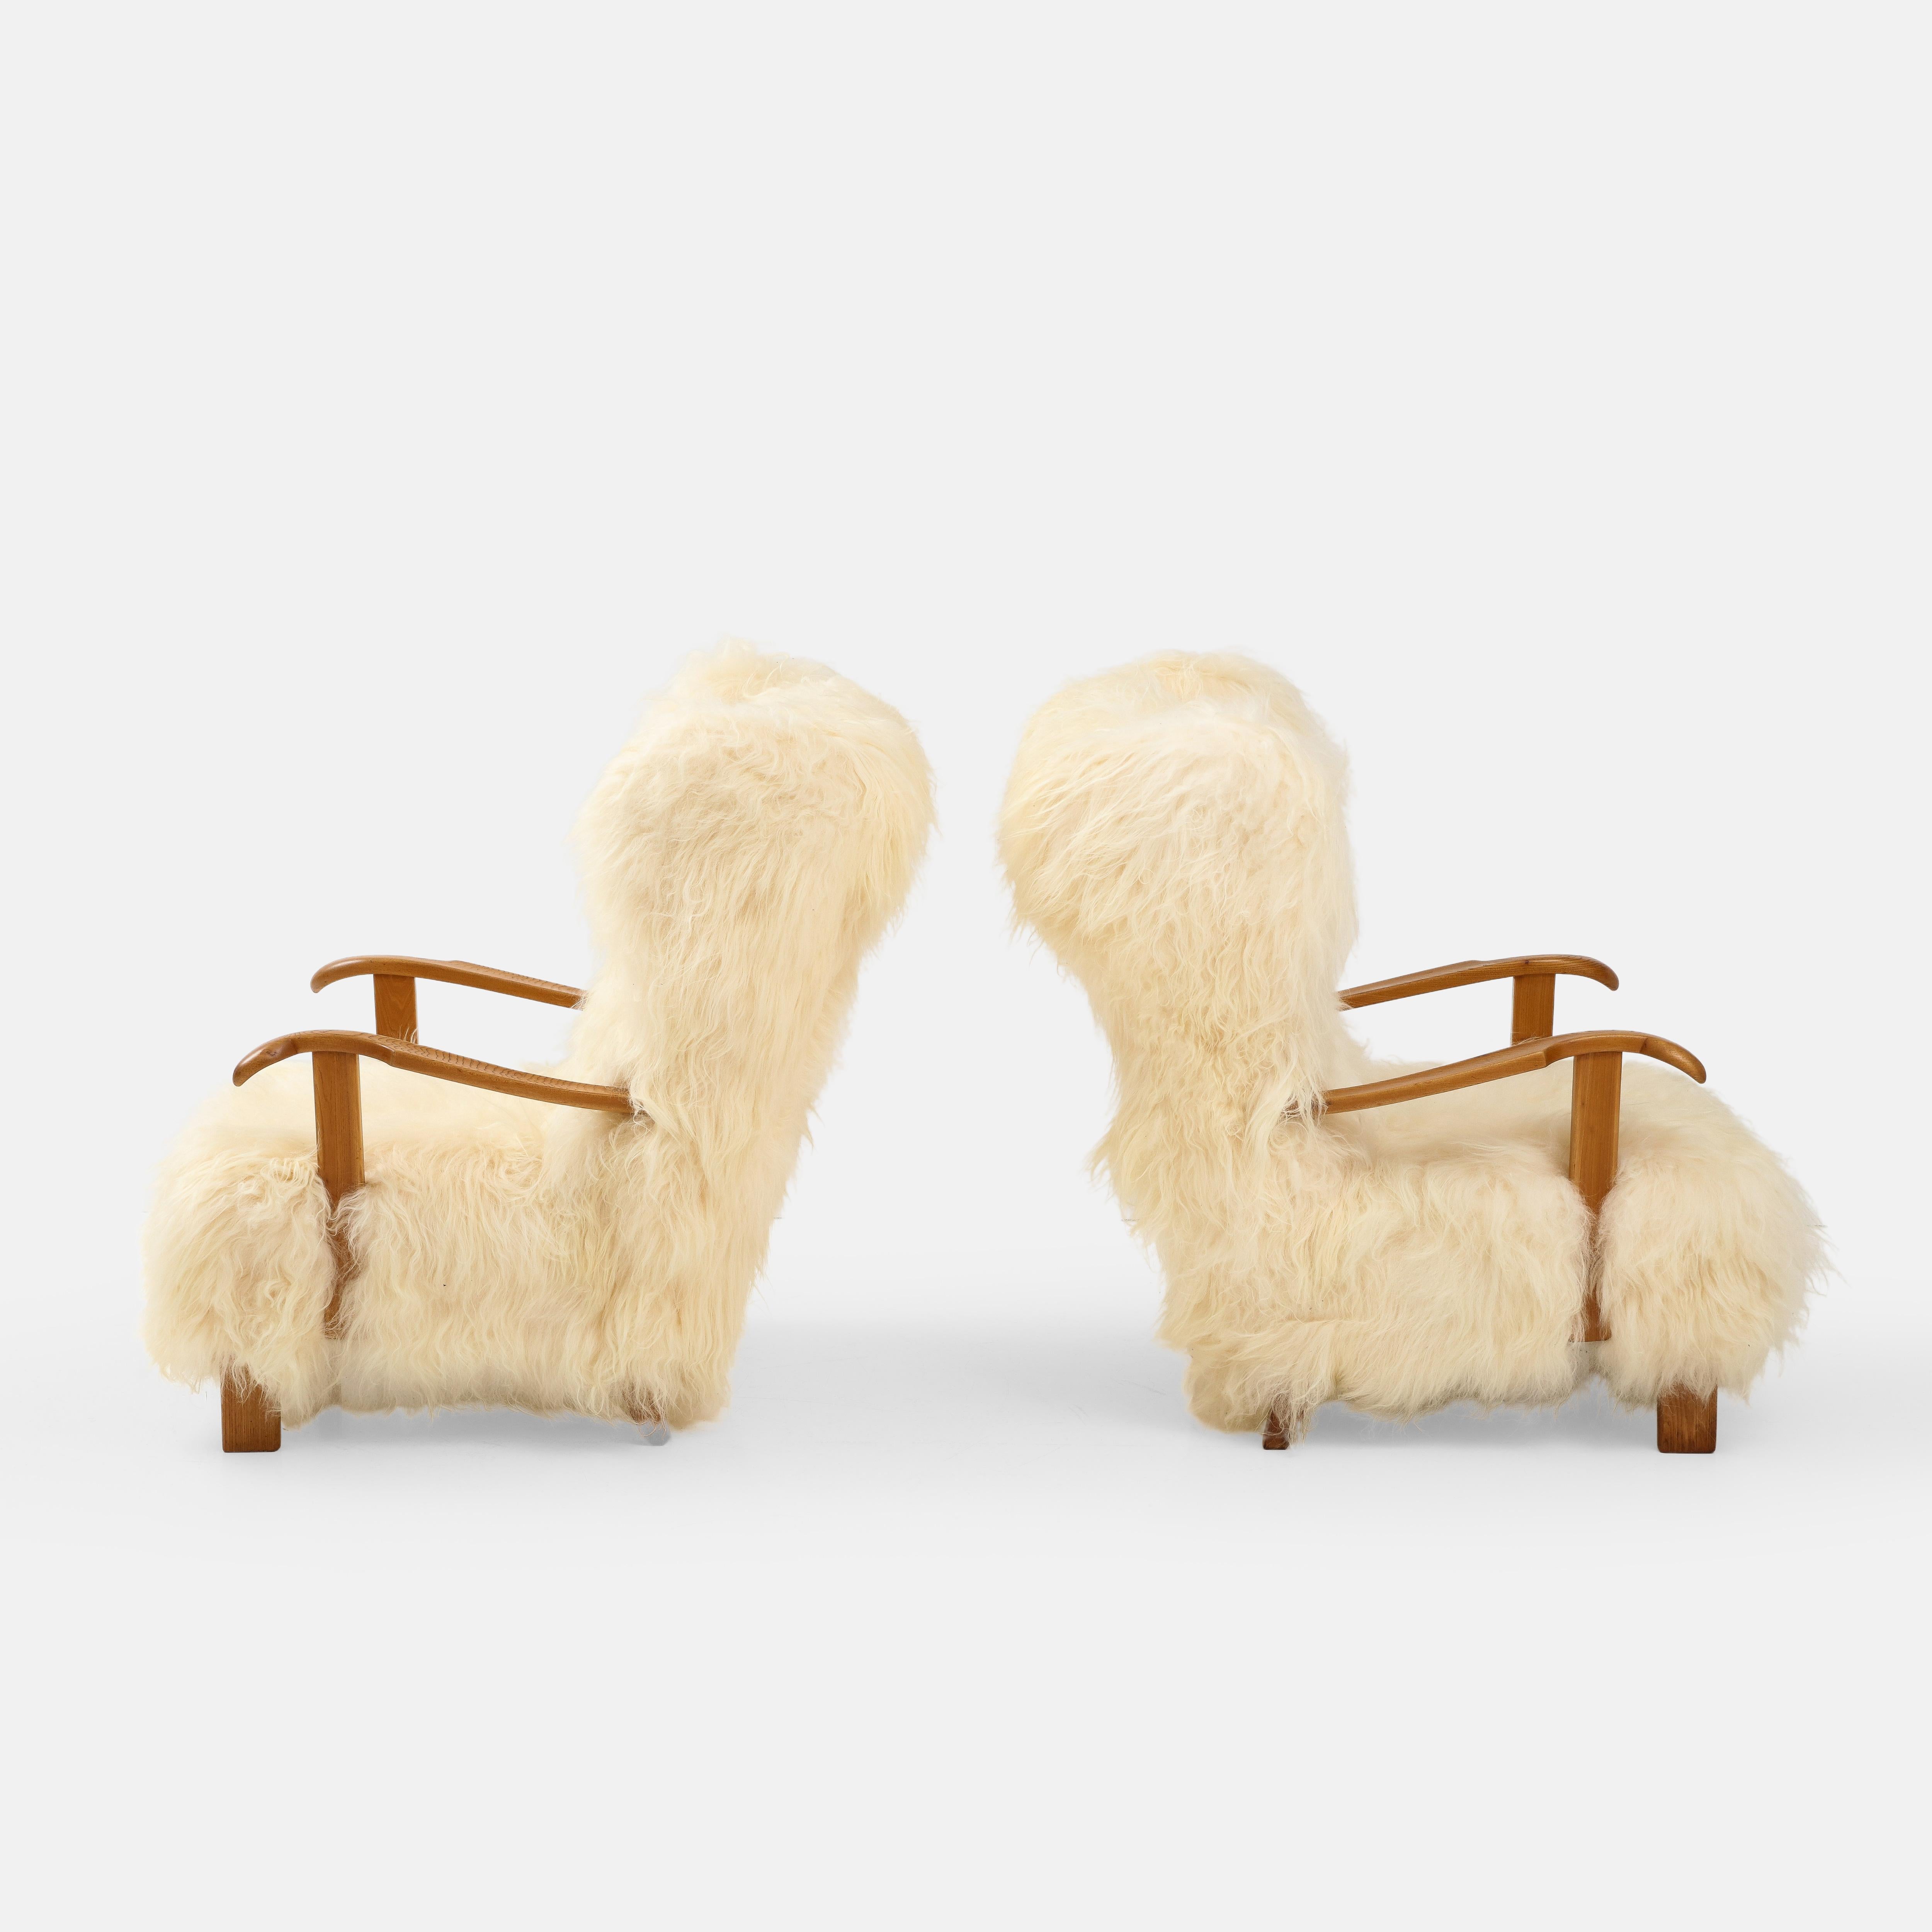 Mid-20th Century Fritz Hansen Rare Pair of Wingback Lounge Chairs Model 1582 in Sheepskin, 1930s For Sale